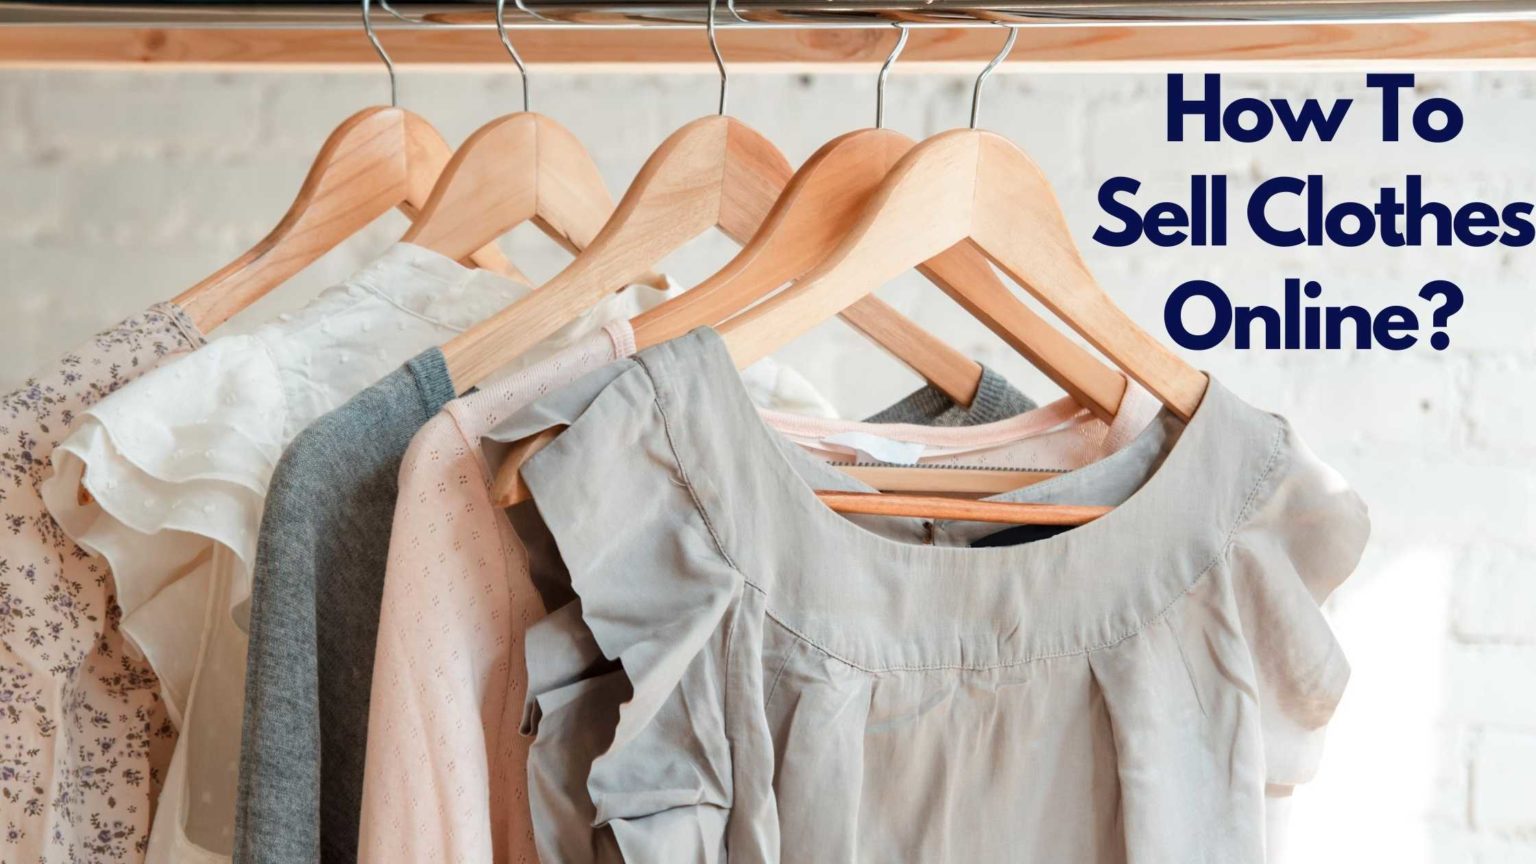 12 Essential Tools For Selling Clothes On